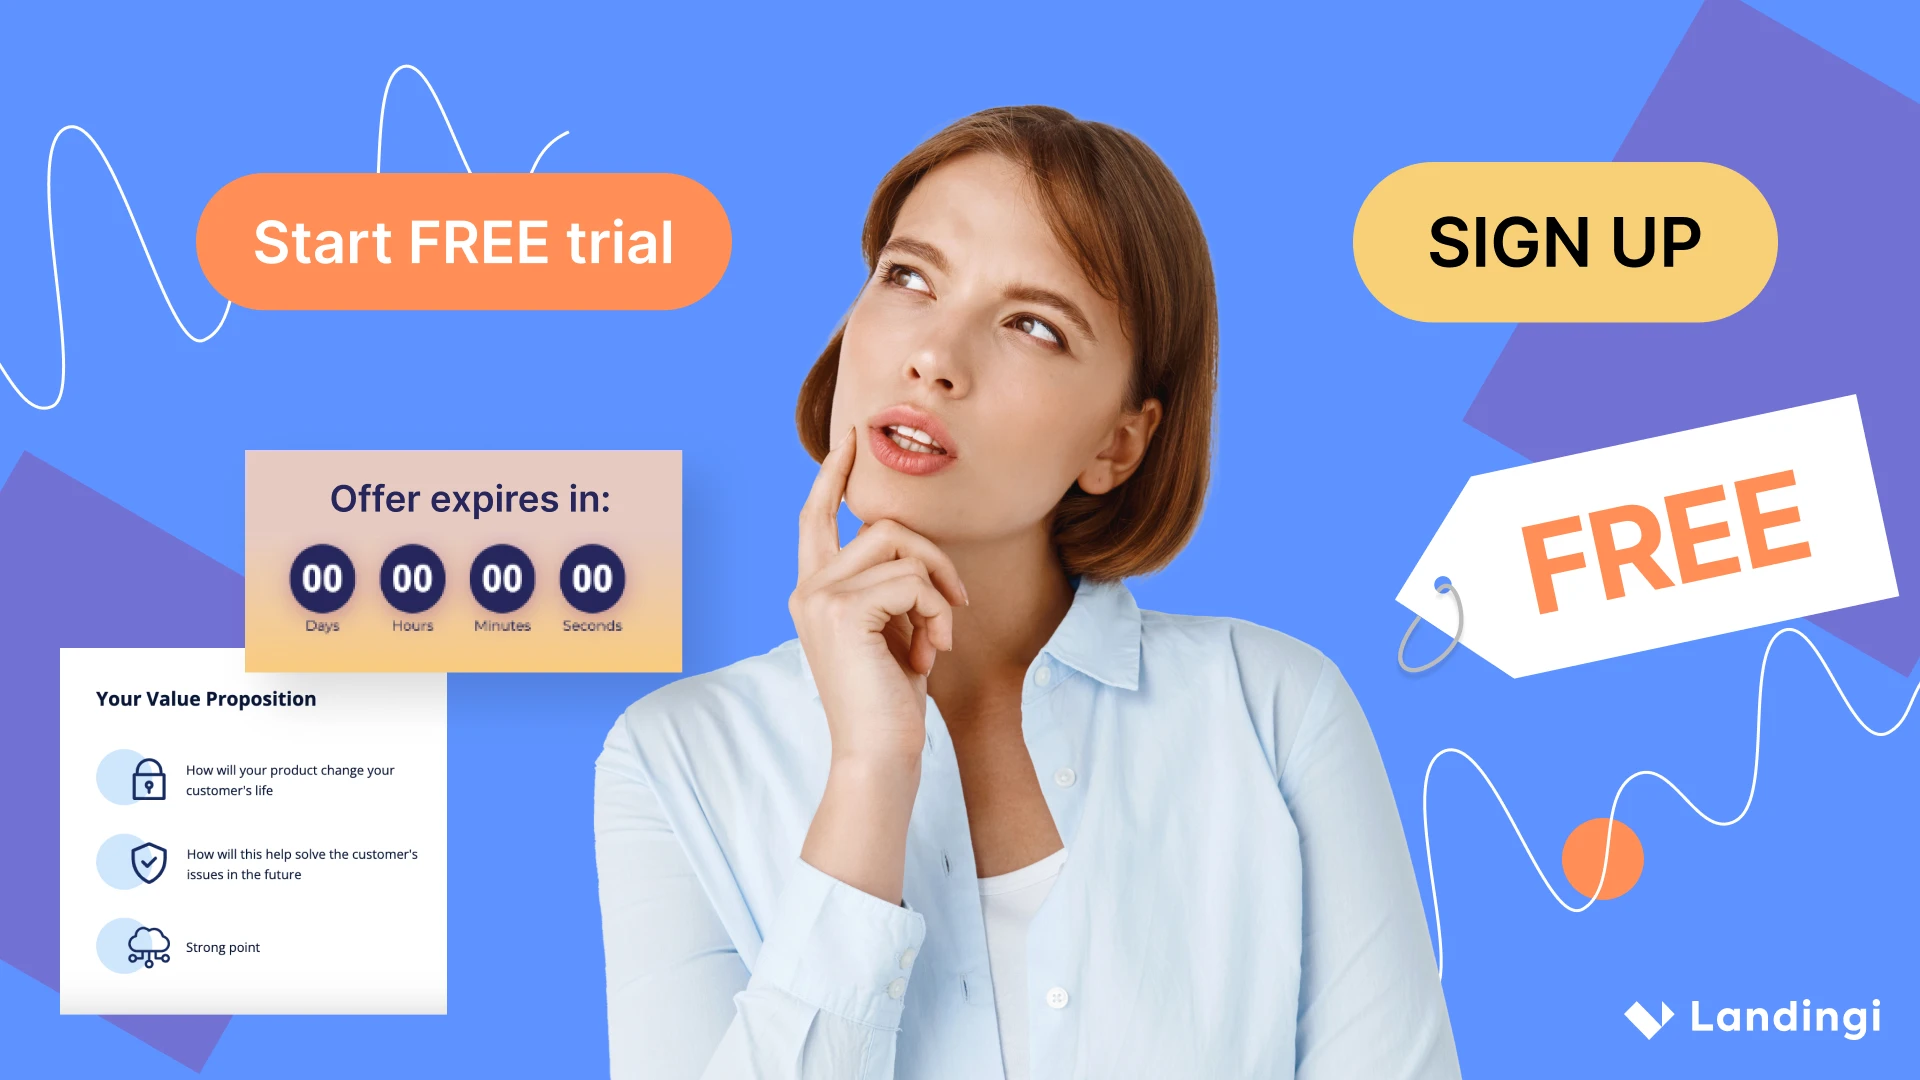 How Do I Create a Free Trial Landing Page